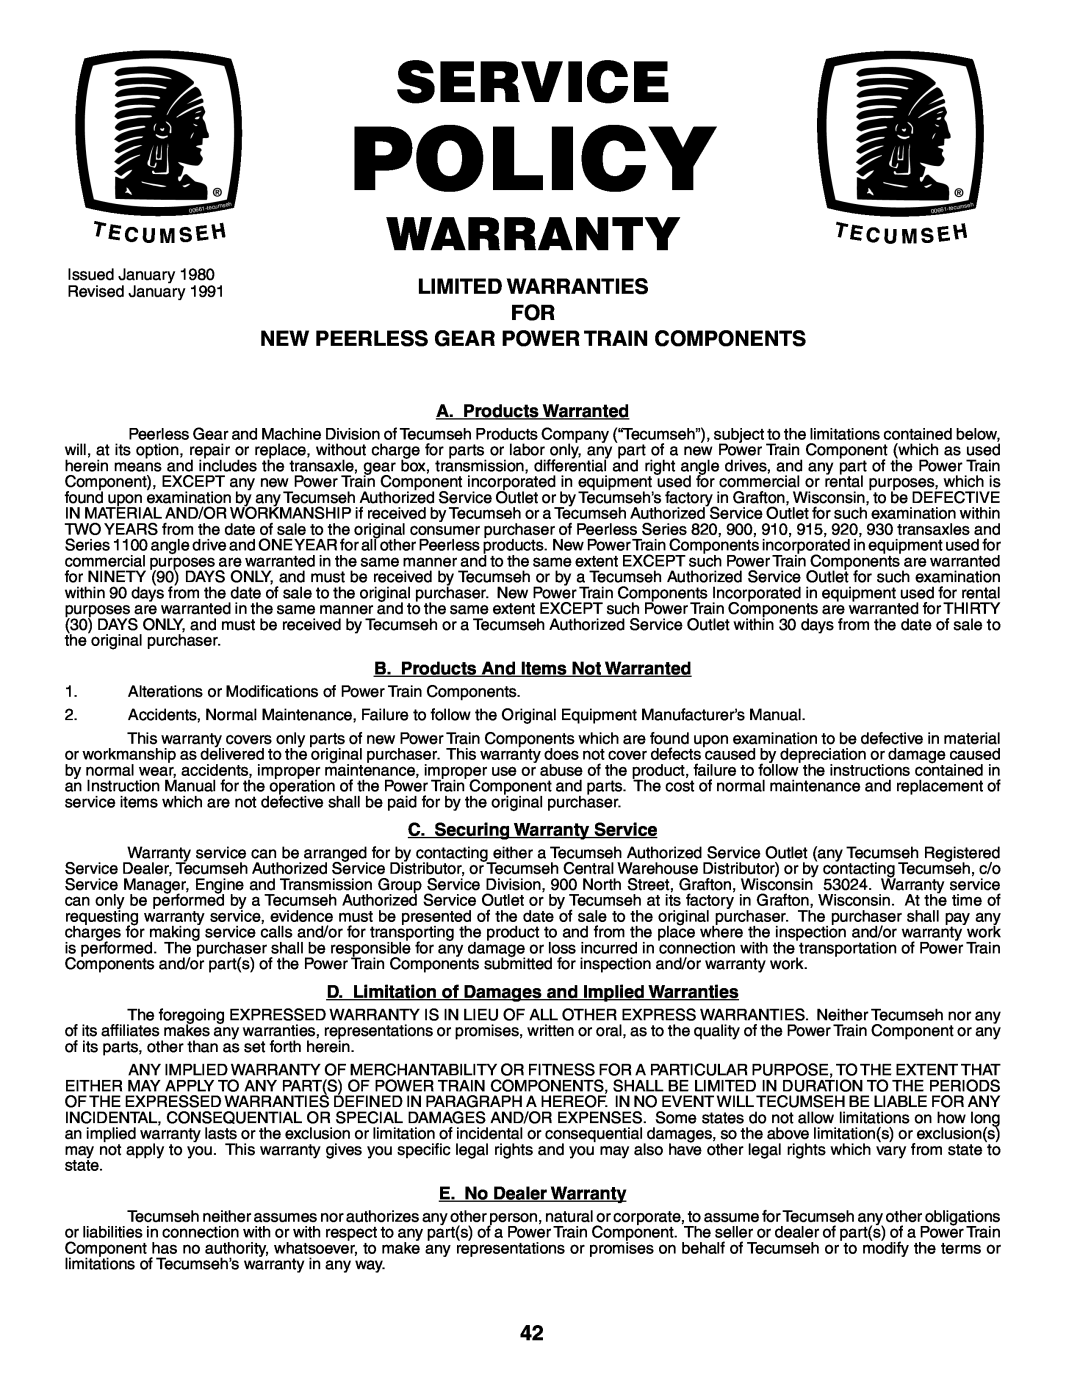 Weed Eater WET17H42STA Limited Warranties For New Peerless Gear Power Train Components, Policy, Service, Warranty, U M S E 